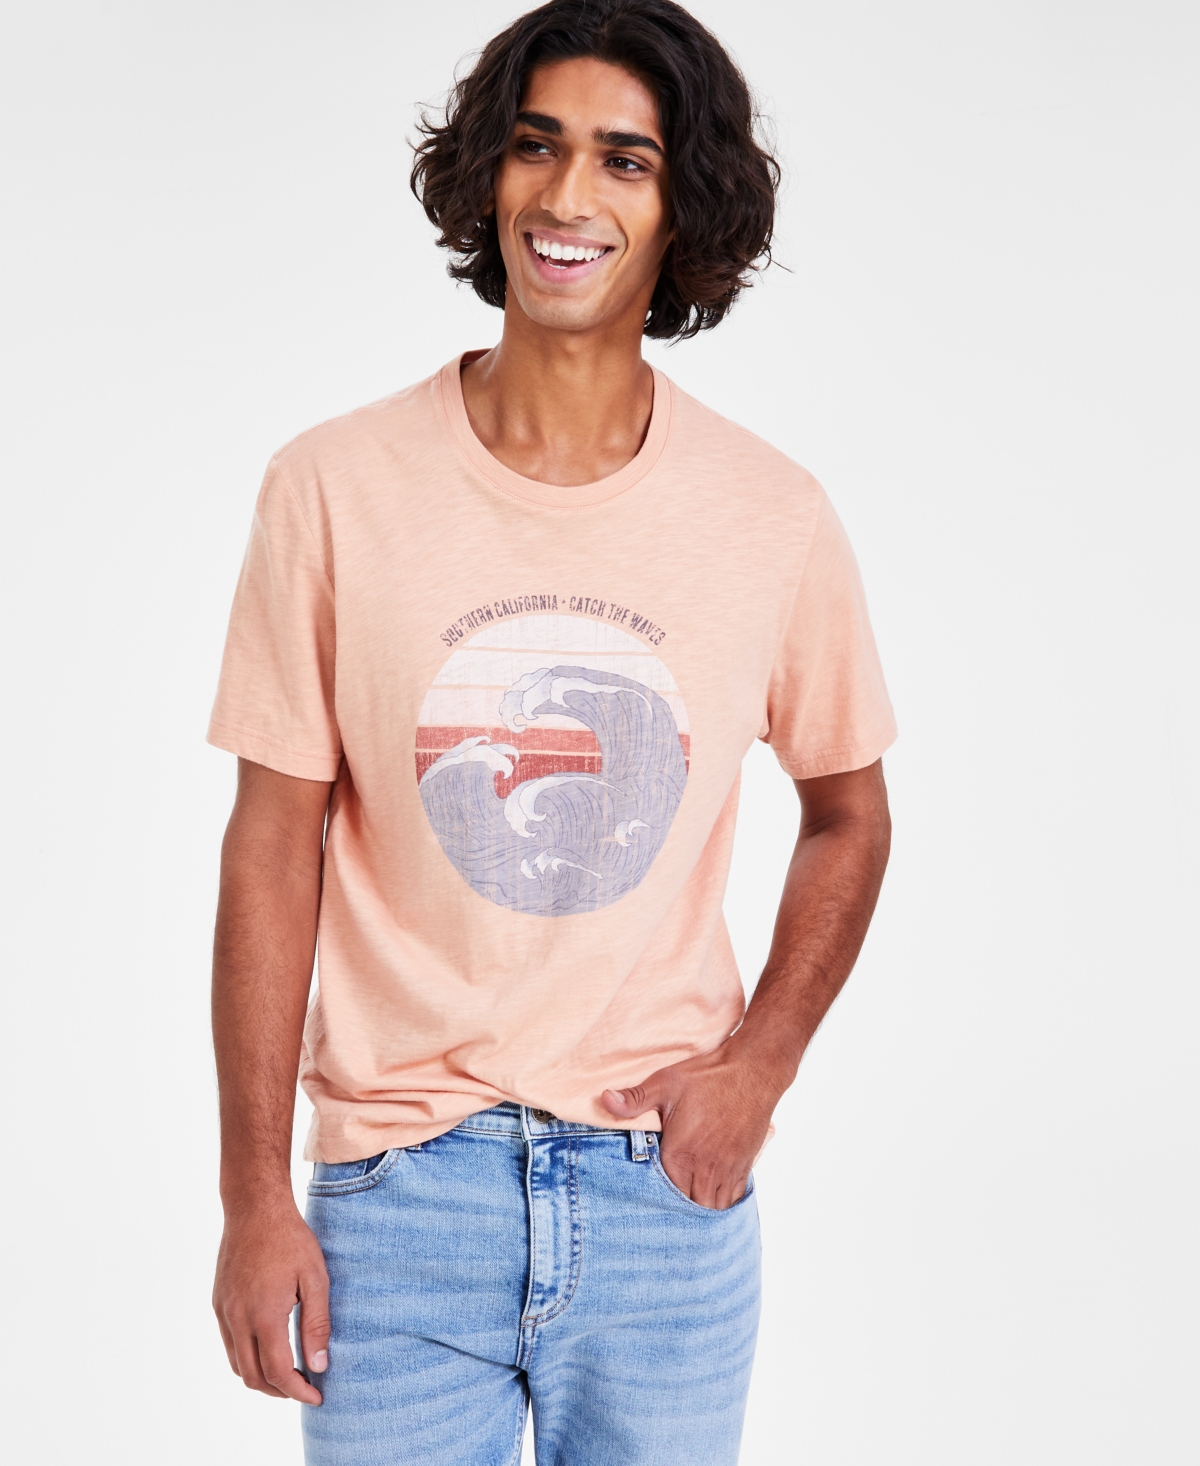 Men's Catch the Waves Graphic T-Shirt, Created for Macy's - Spiced Peach